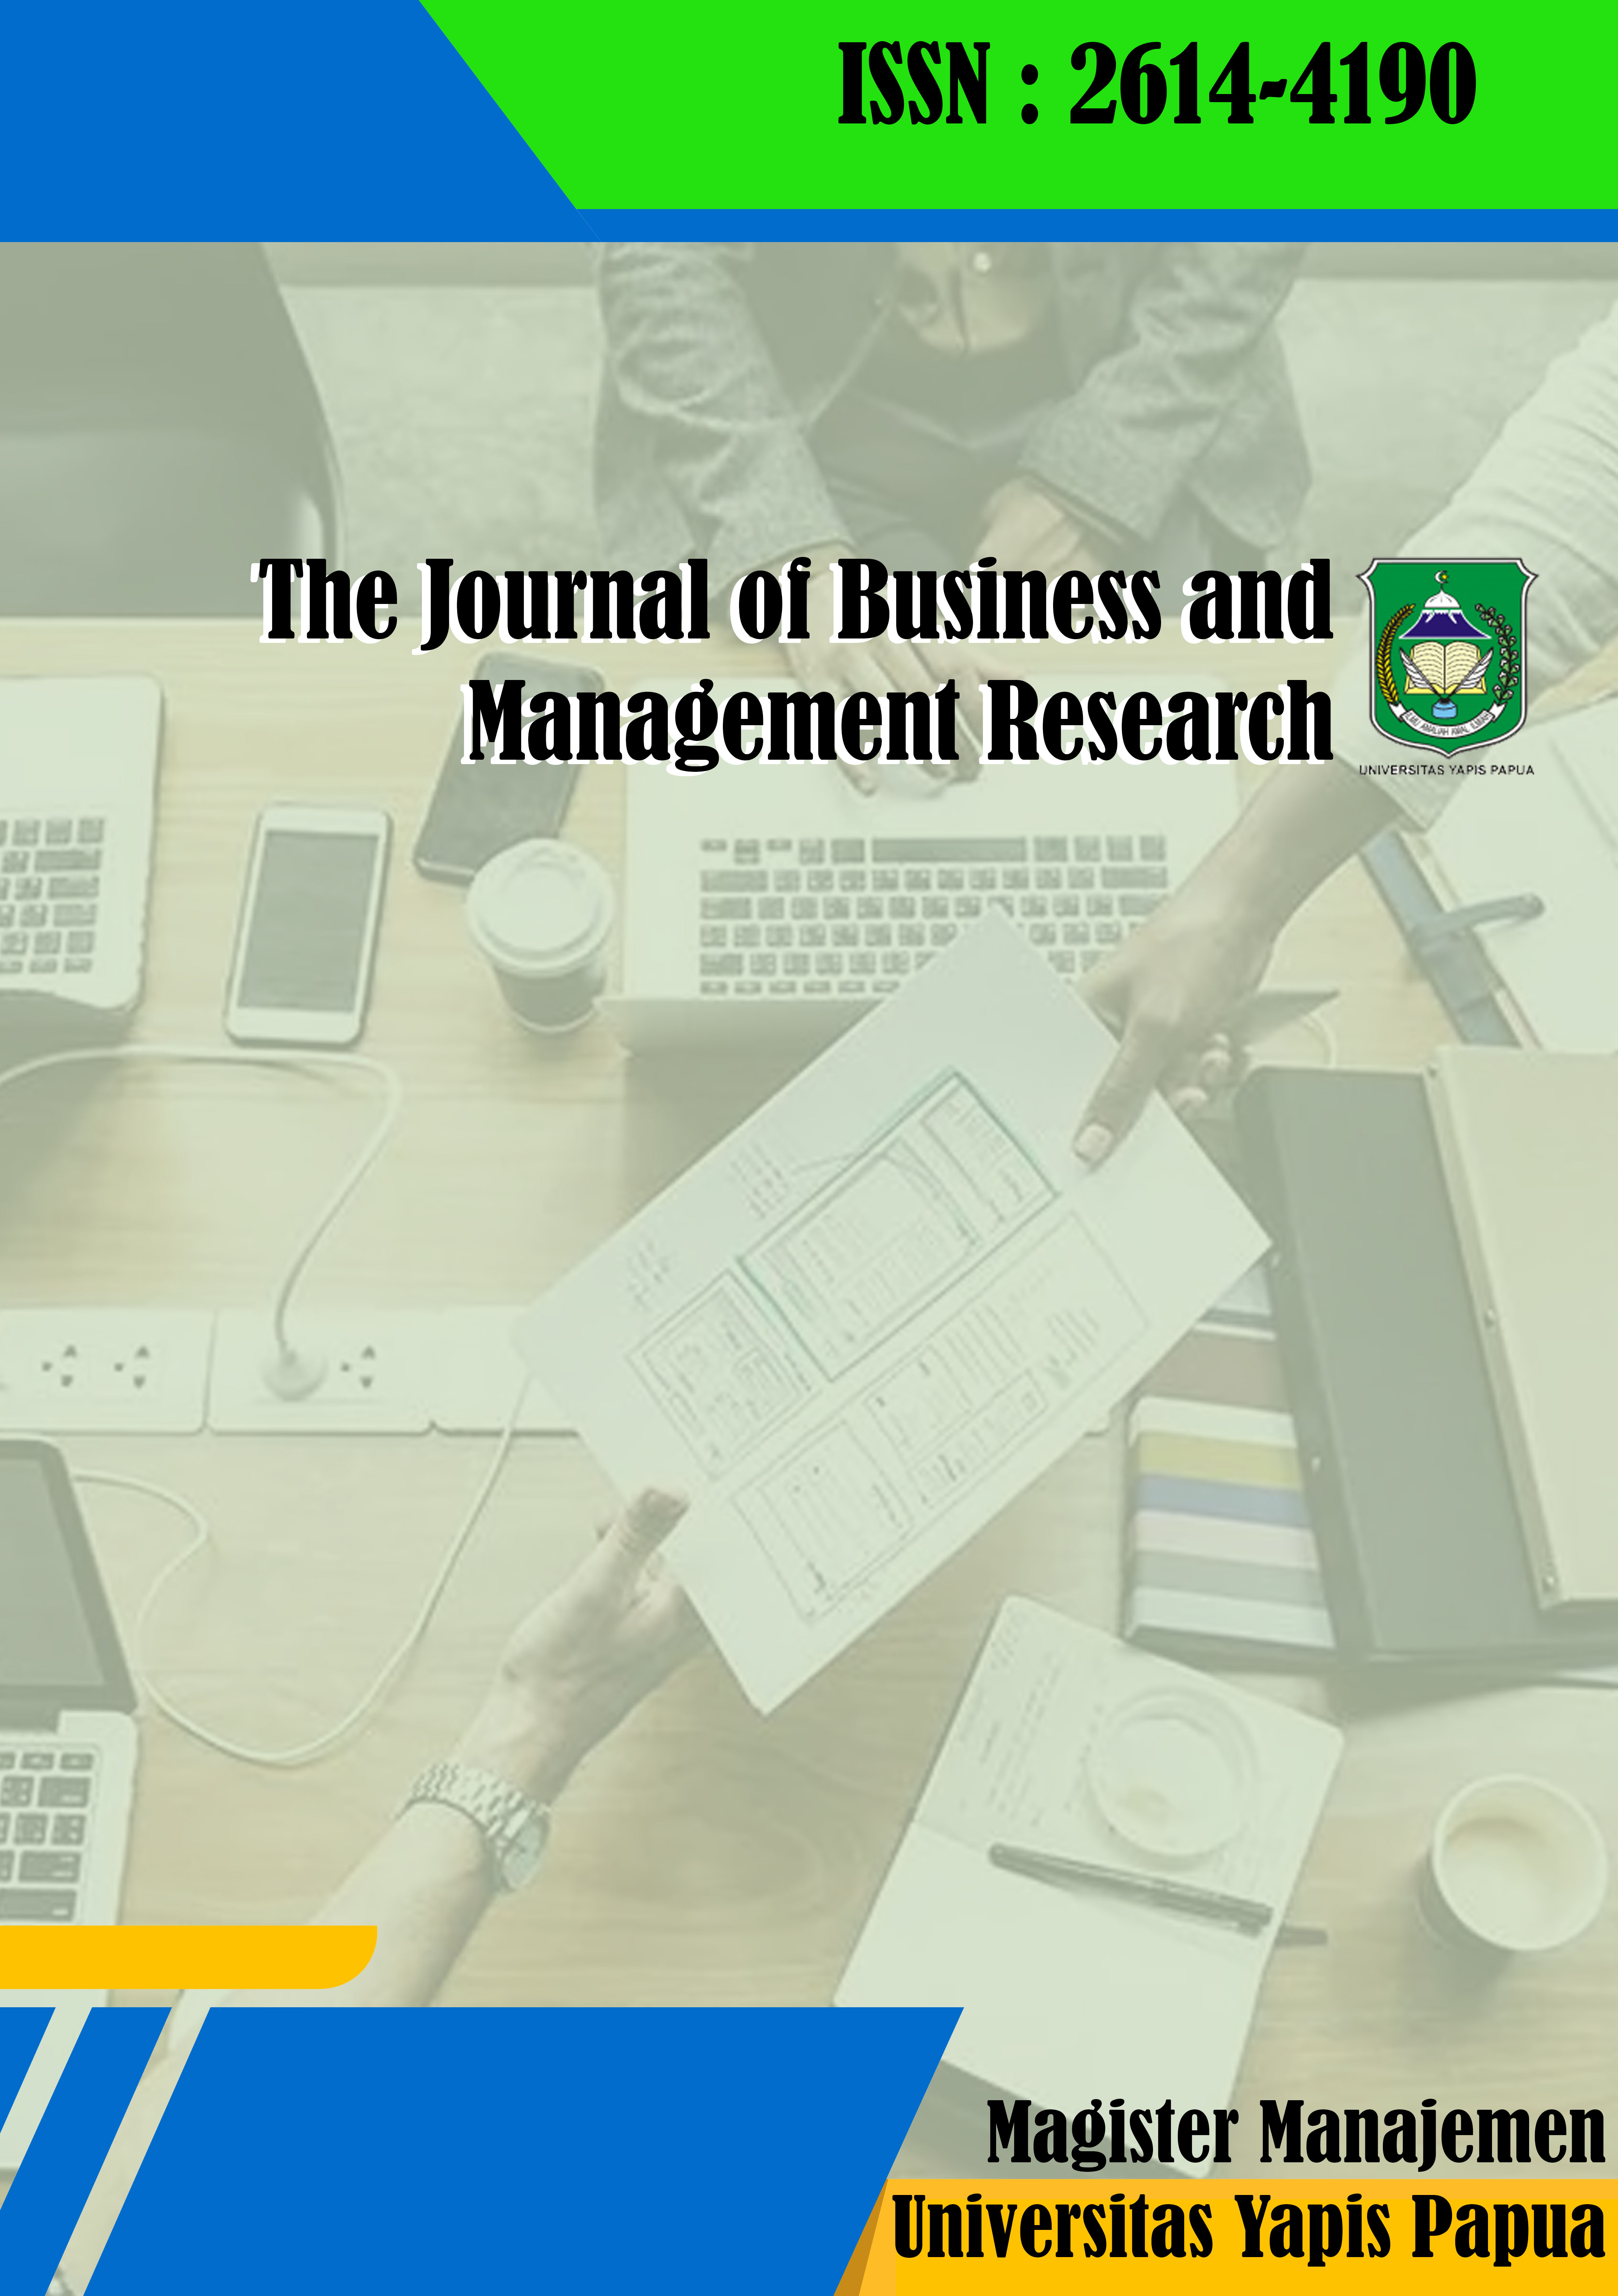 					Lihat Vol 5 No 2 (2022): ISSN : 2614-4190 - The Journal of Business and Management Research - Juli 2022
				